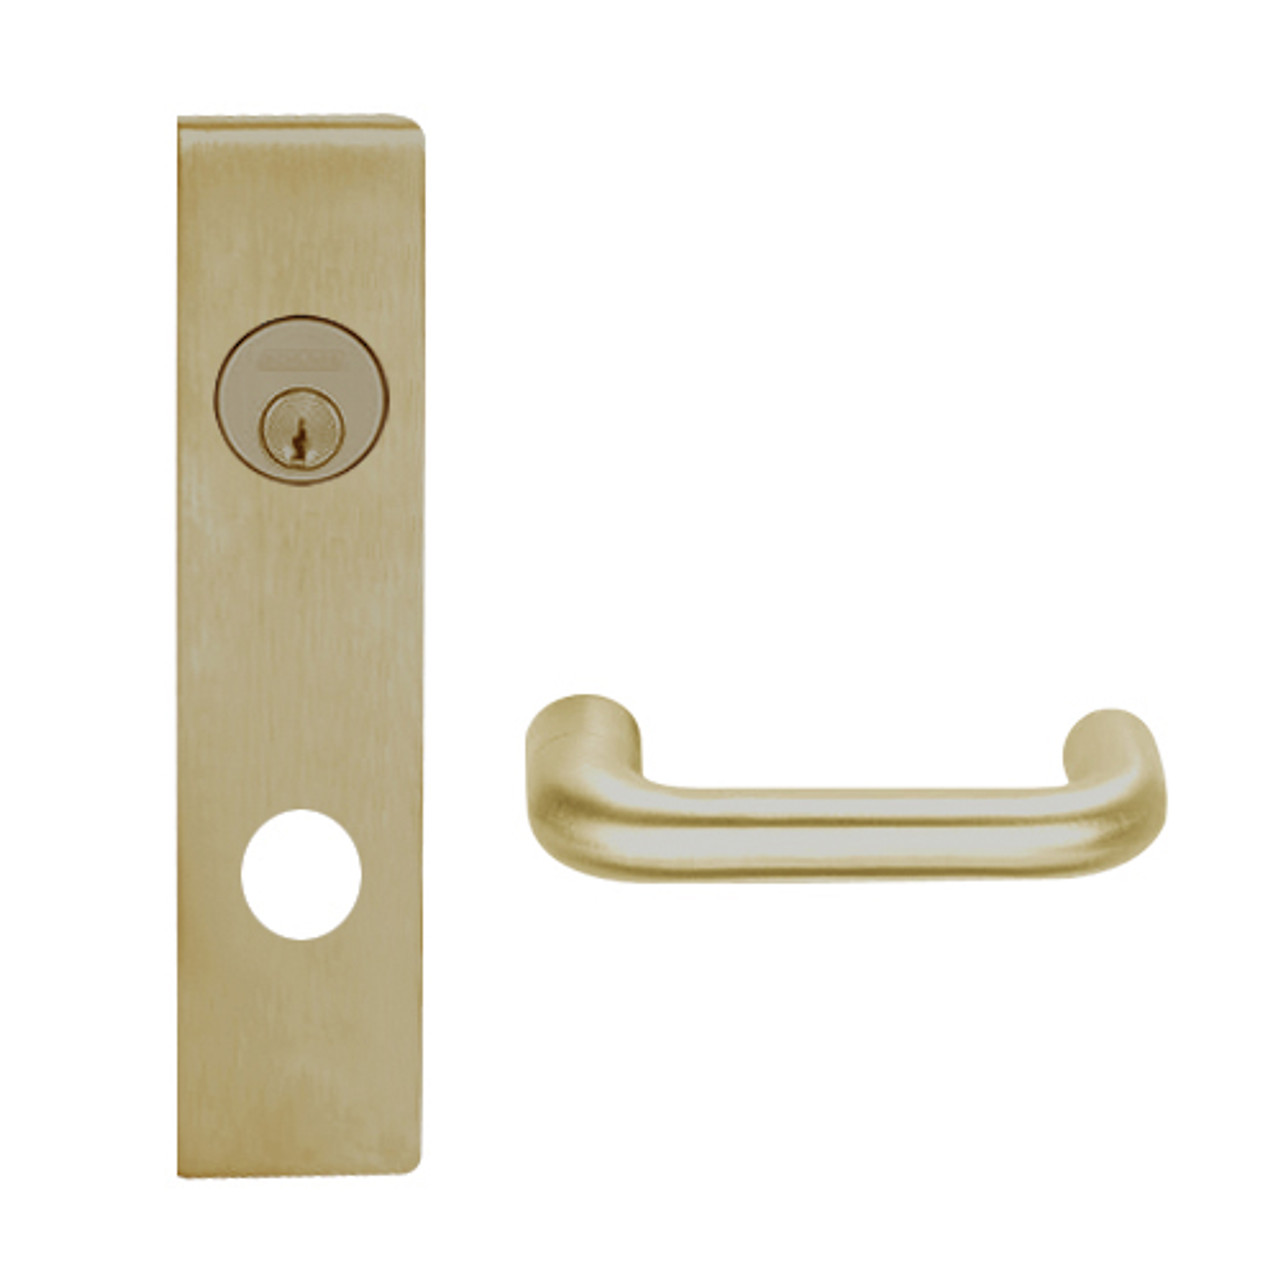 L9026L-03L-613 Schlage L Series Less Cylinder Exit Lock with Cylinder Commercial Mortise Lock with 03 Cast Lever Design in Oil Rubbed Bronze